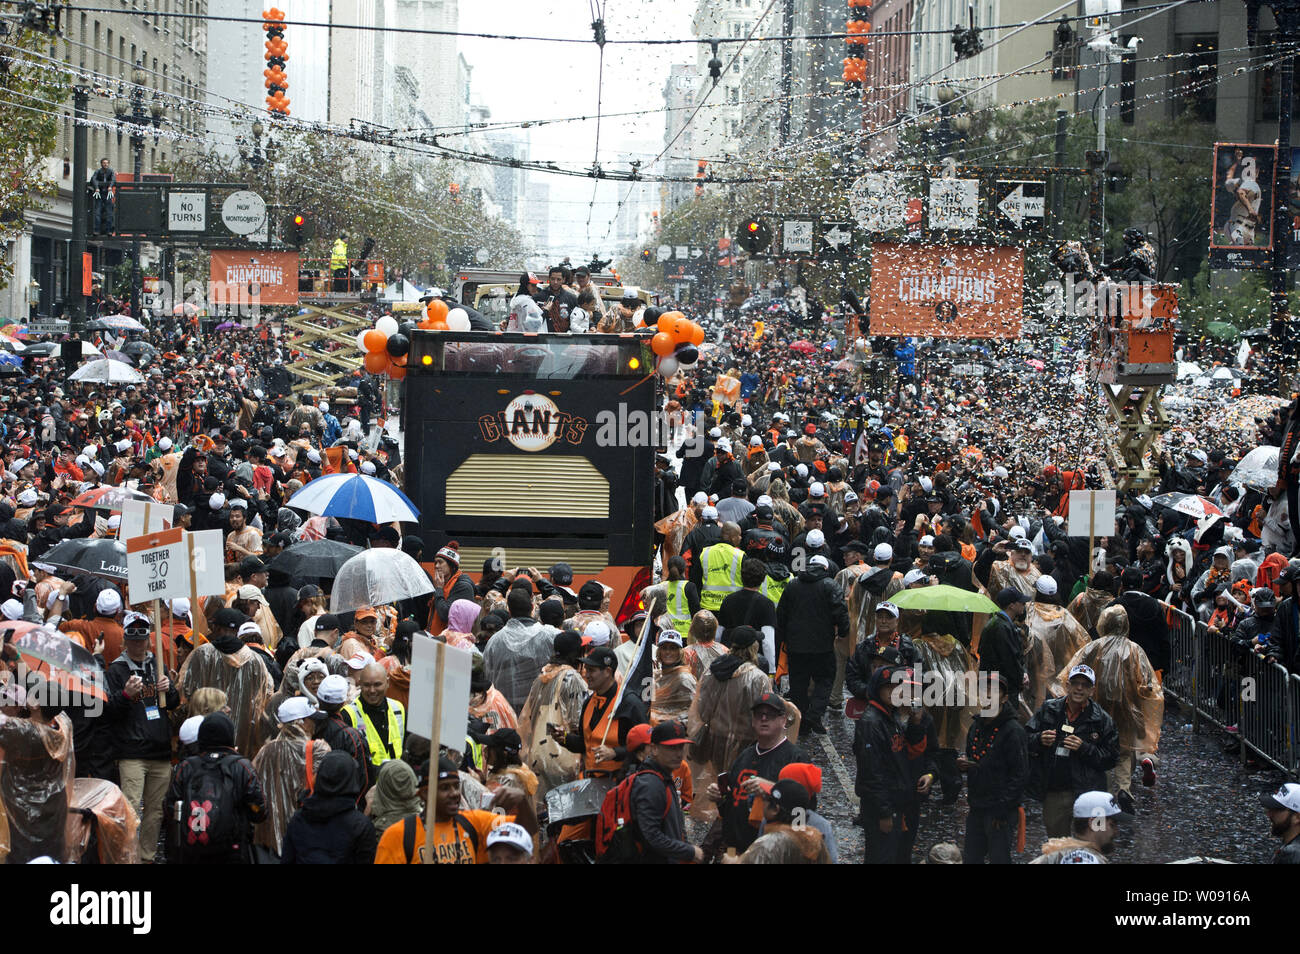 San Francisco Giants employees and players jam Market Street at the World  Series Parade in San Francisco on October 31, 2014. The Giants defeated the Kansas  City Royals in game 7 to